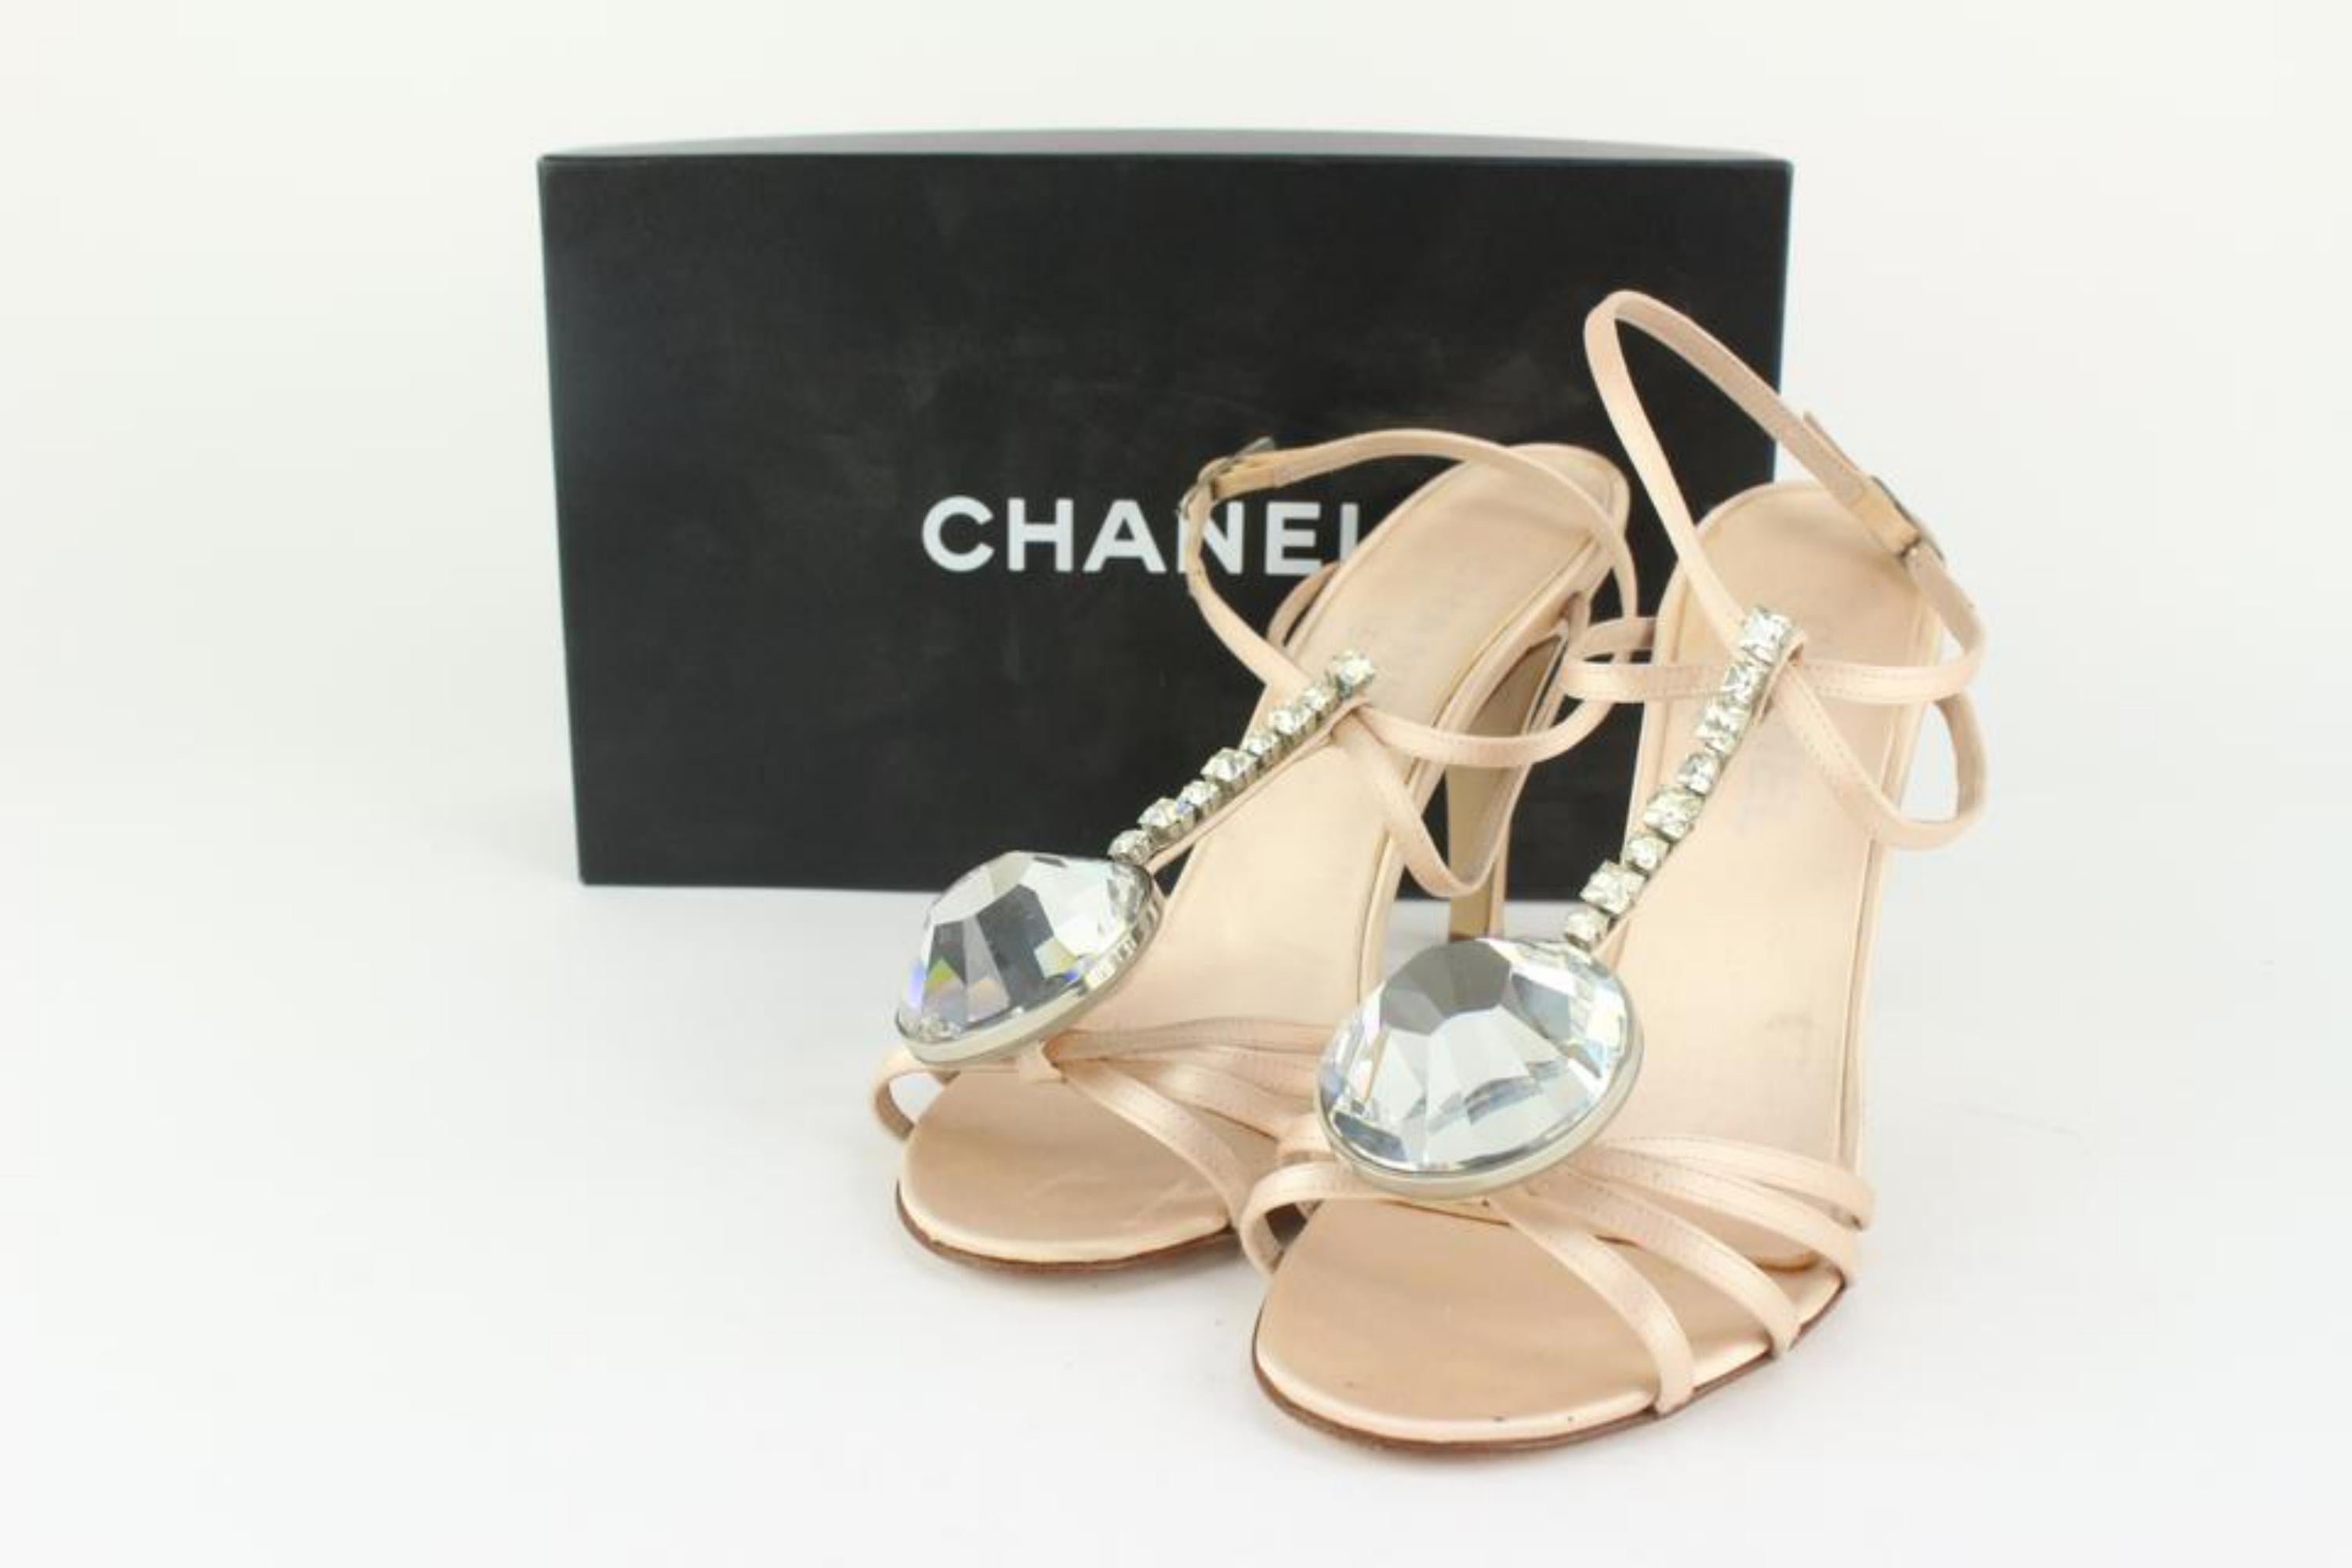 Chanel G24639 Size 41 Jumbo Crystal Strappy Satin Heels 129c3
Made In: Italy
Measurements: Length:  10